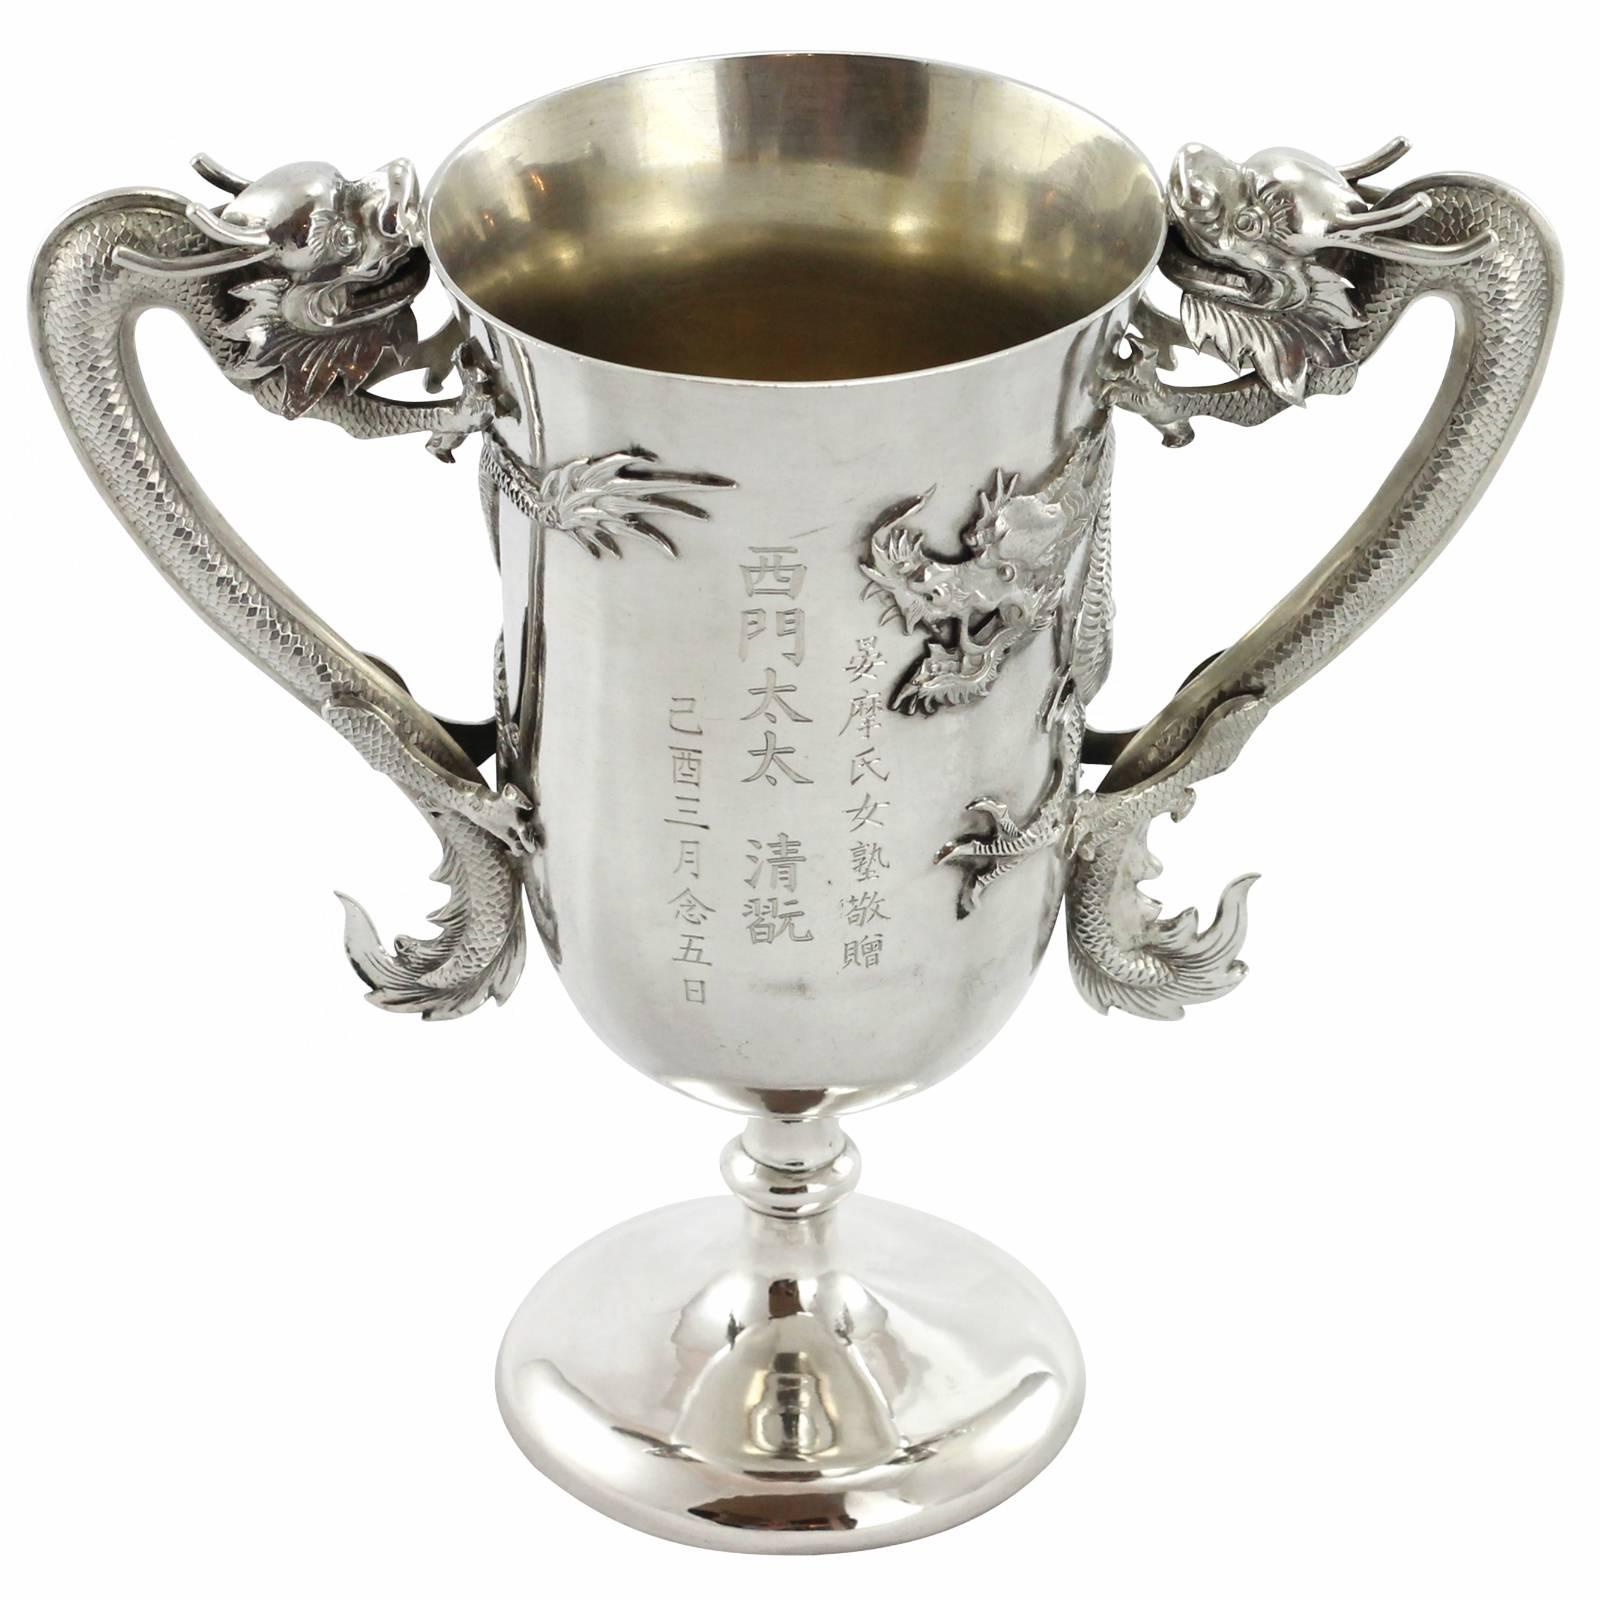 An early 20th century Chinese export silver trophy by famed Shanghai silver retailers, Luen Wo. Known as one of China’s most prolific and desirable retail silversmiths, Luen Wo operated out of Shanghai from 1880 to 1940. This trophy features a pair